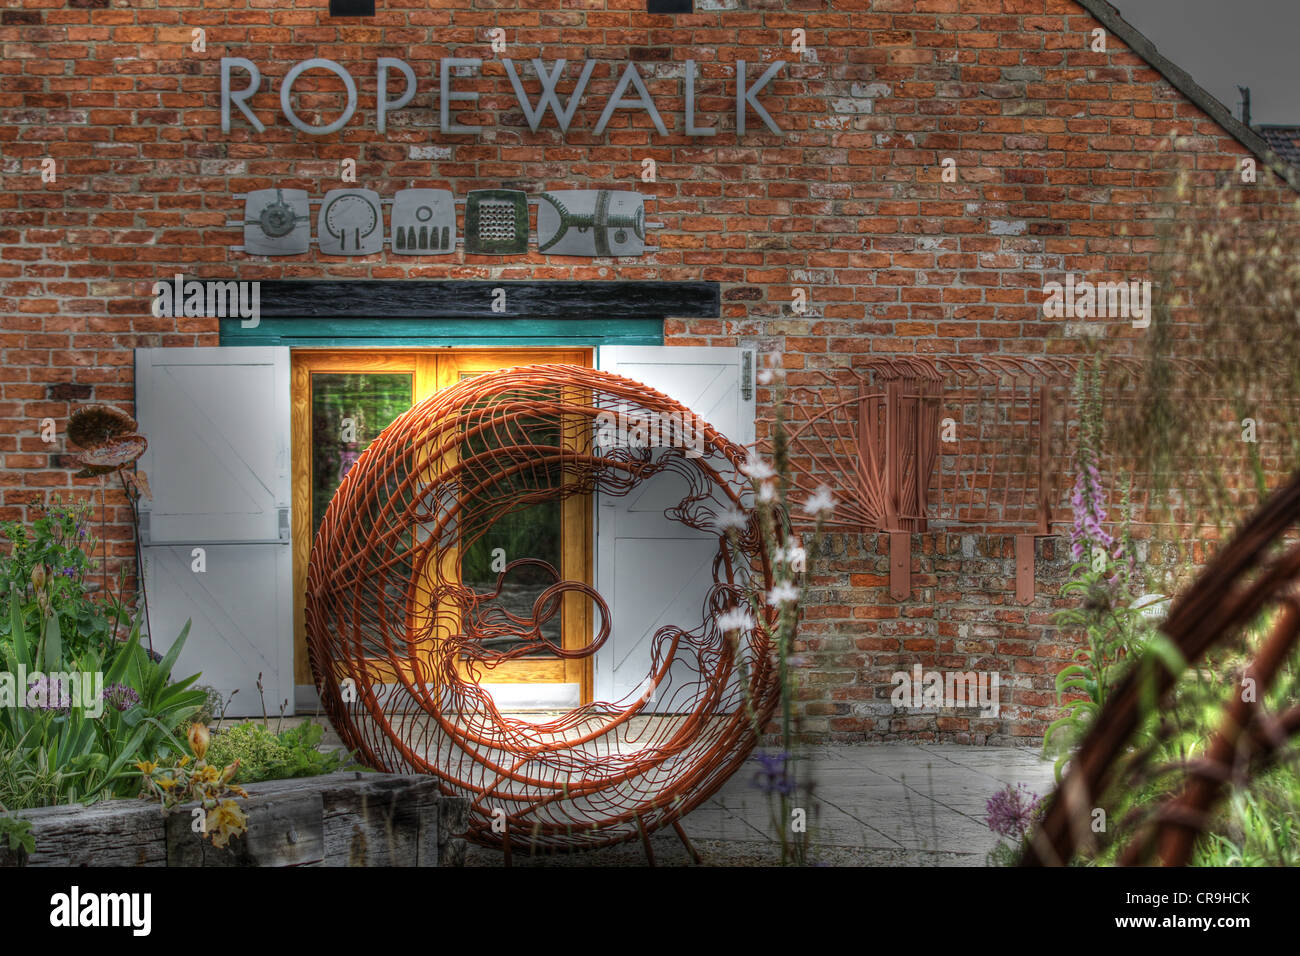 Ropewalk Art Gallery Barton Upon Humber in Lincolnshire Stock Photo